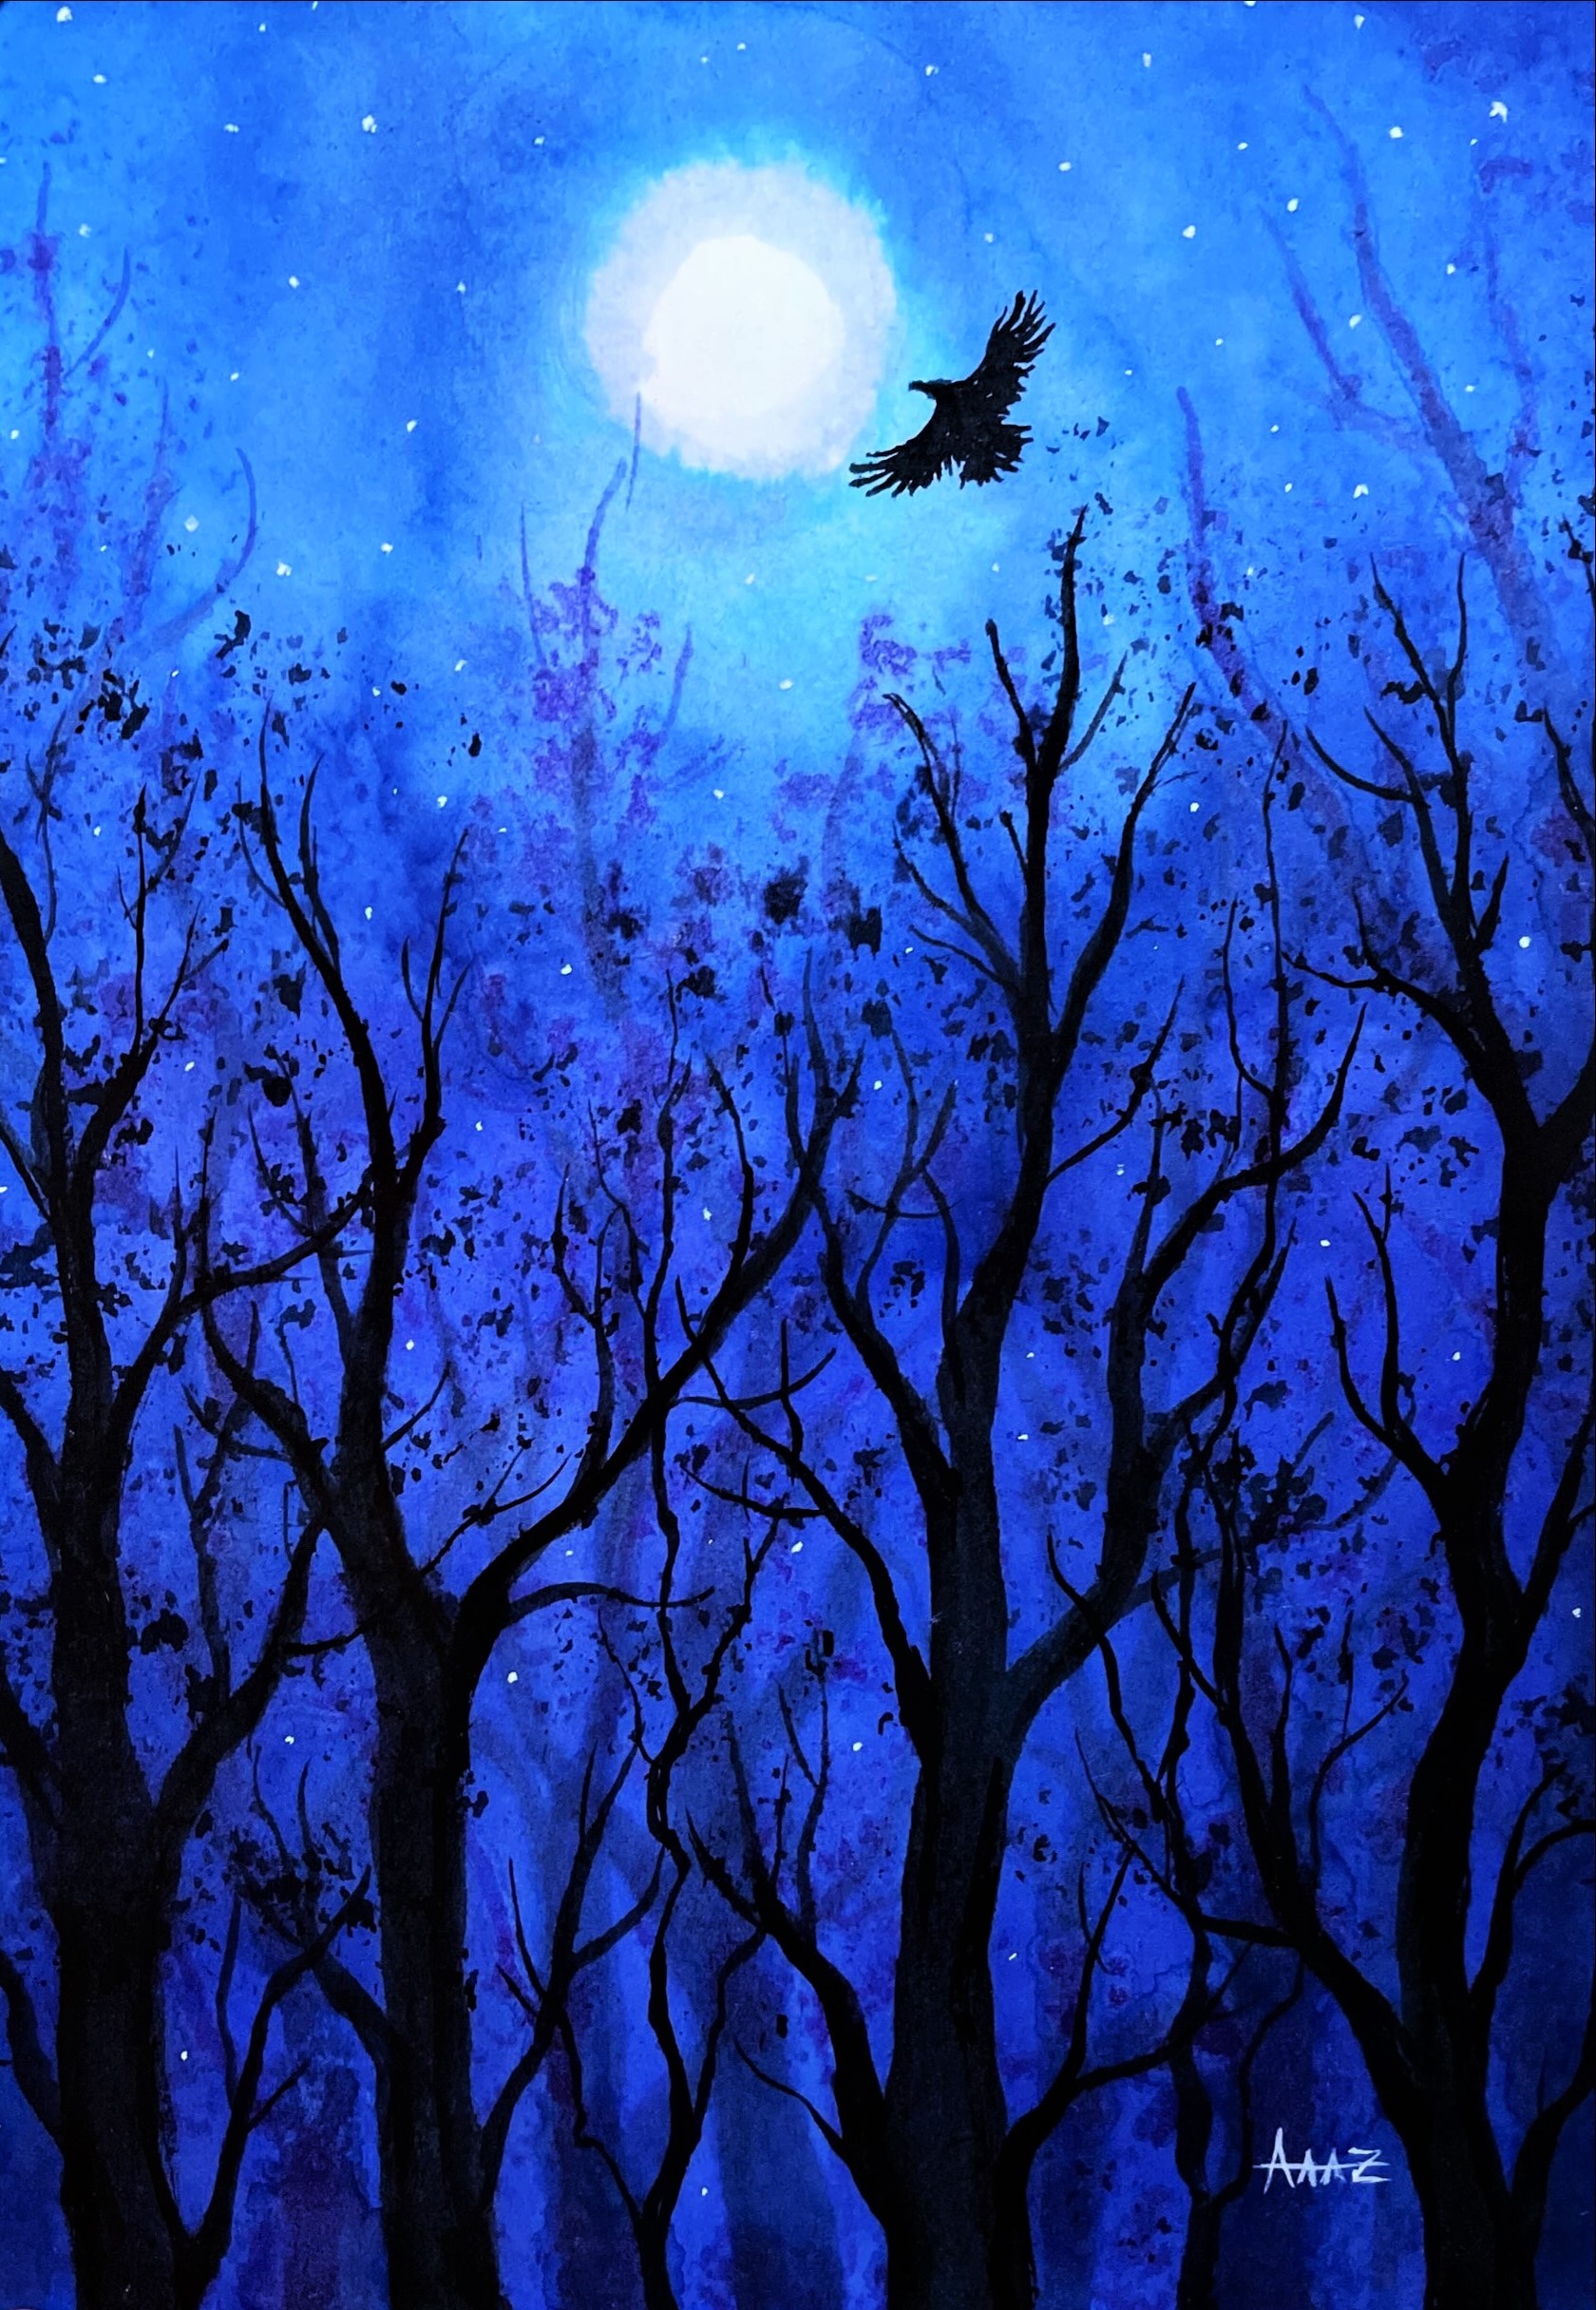 Raven in love with the moon - Romance, Crow, moon, Landscape, The senses, Night, Summer, Nature, Liberty, Inspiration, Philosophy, Emotions, Watercolor, Ink, Painting, Artist, Art, Drawing, Art, Soul, My